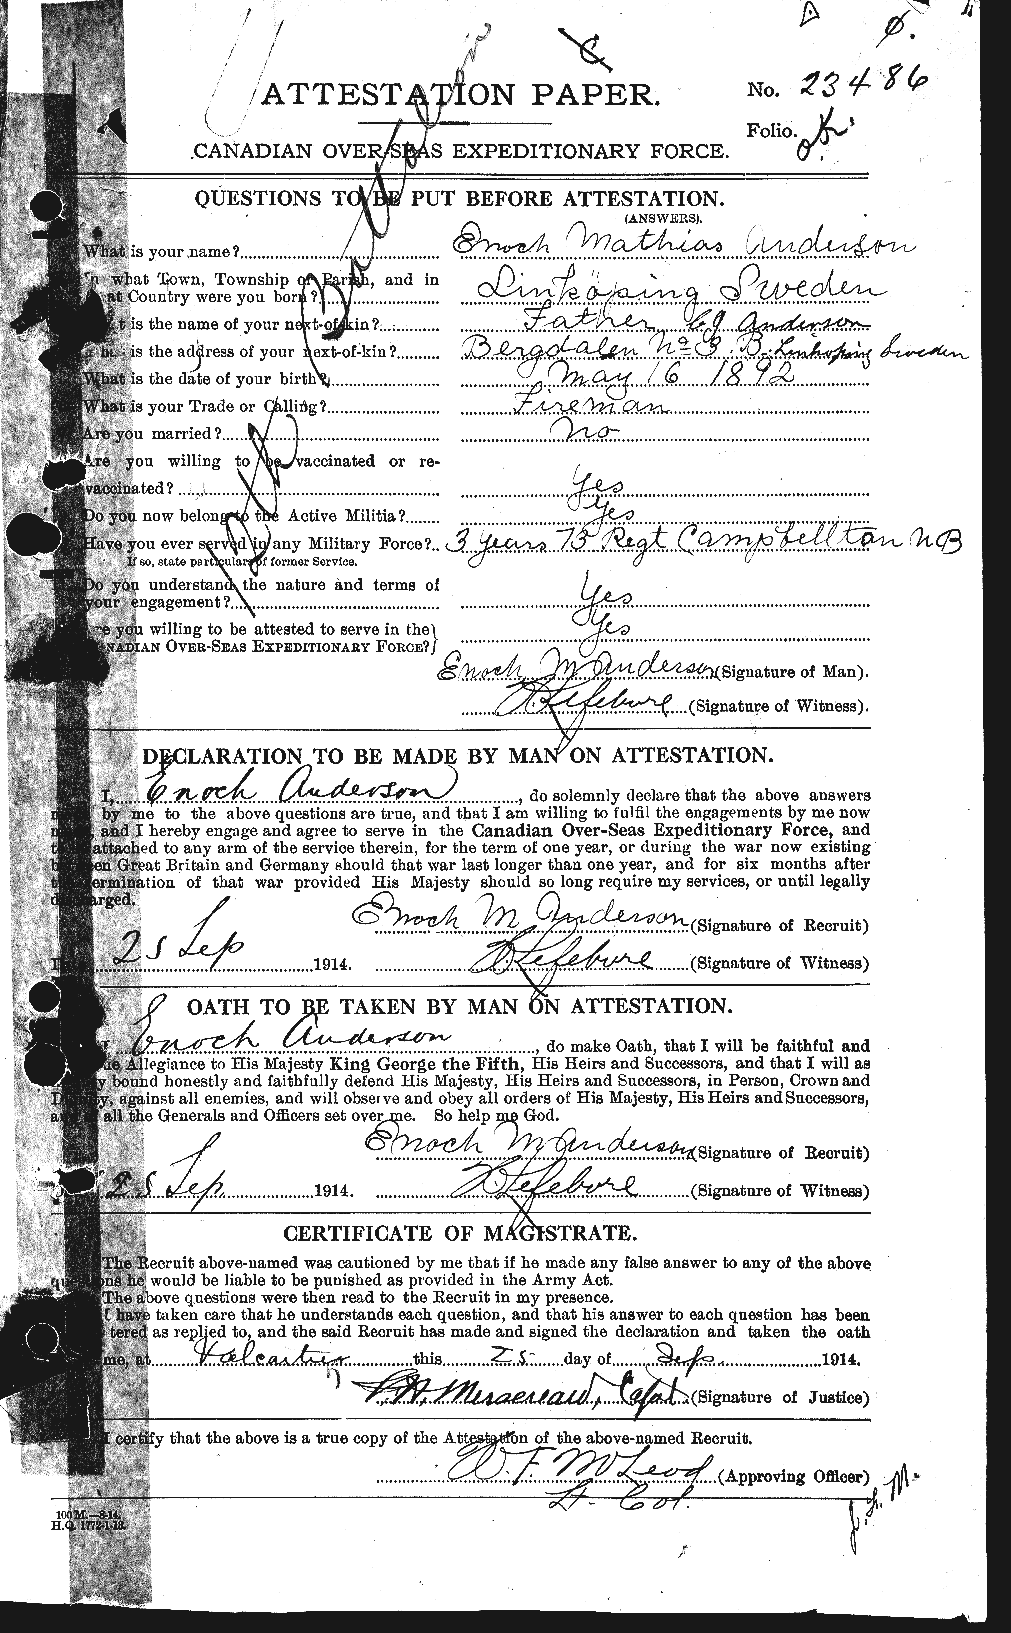 Personnel Records of the First World War - CEF 209900a